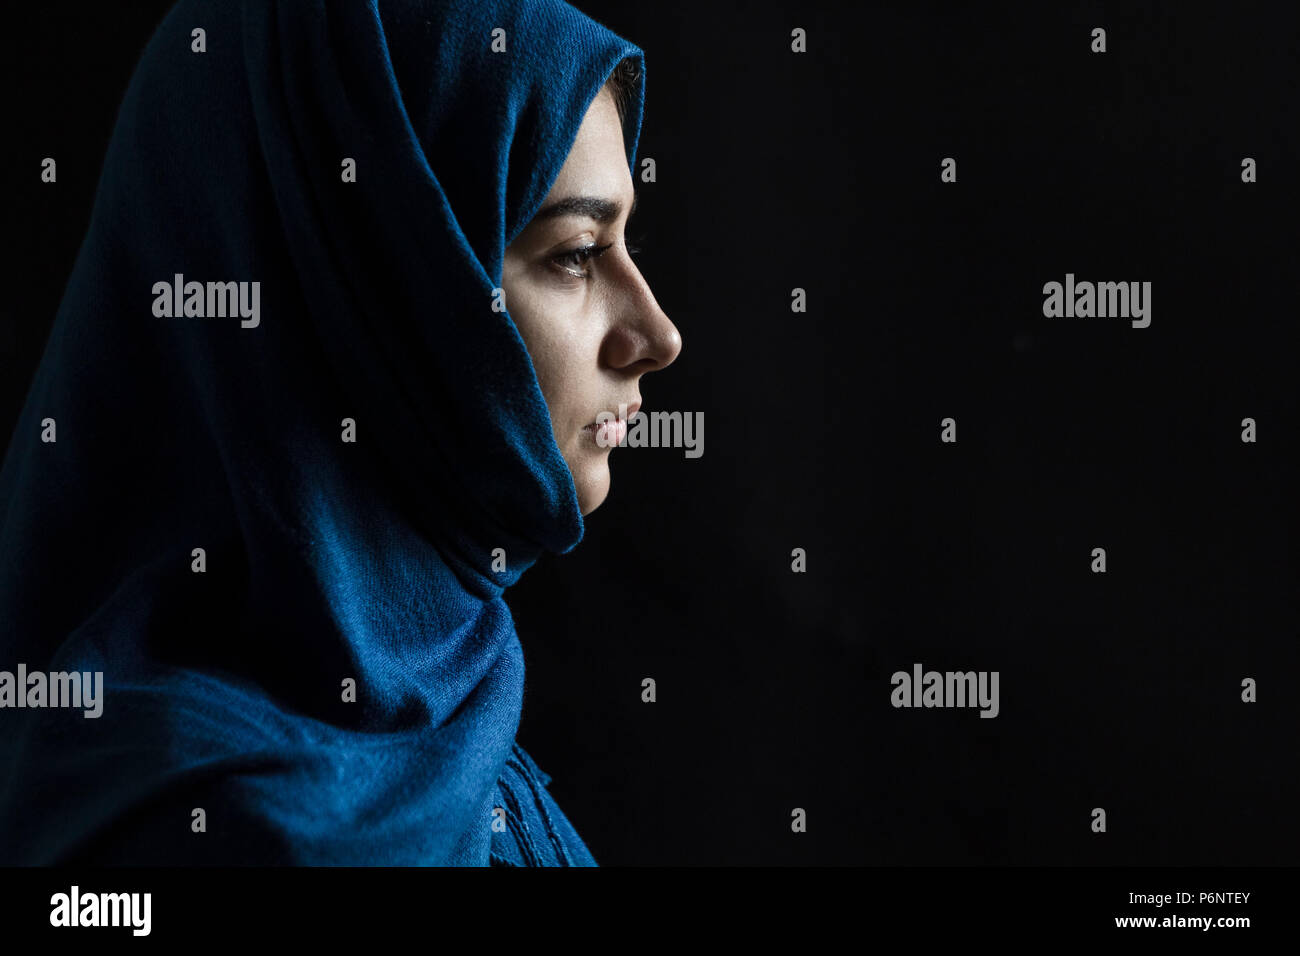 Muslim beautiful girl in hijab. Portrait of an arab young woman on a black background. Stock Photo